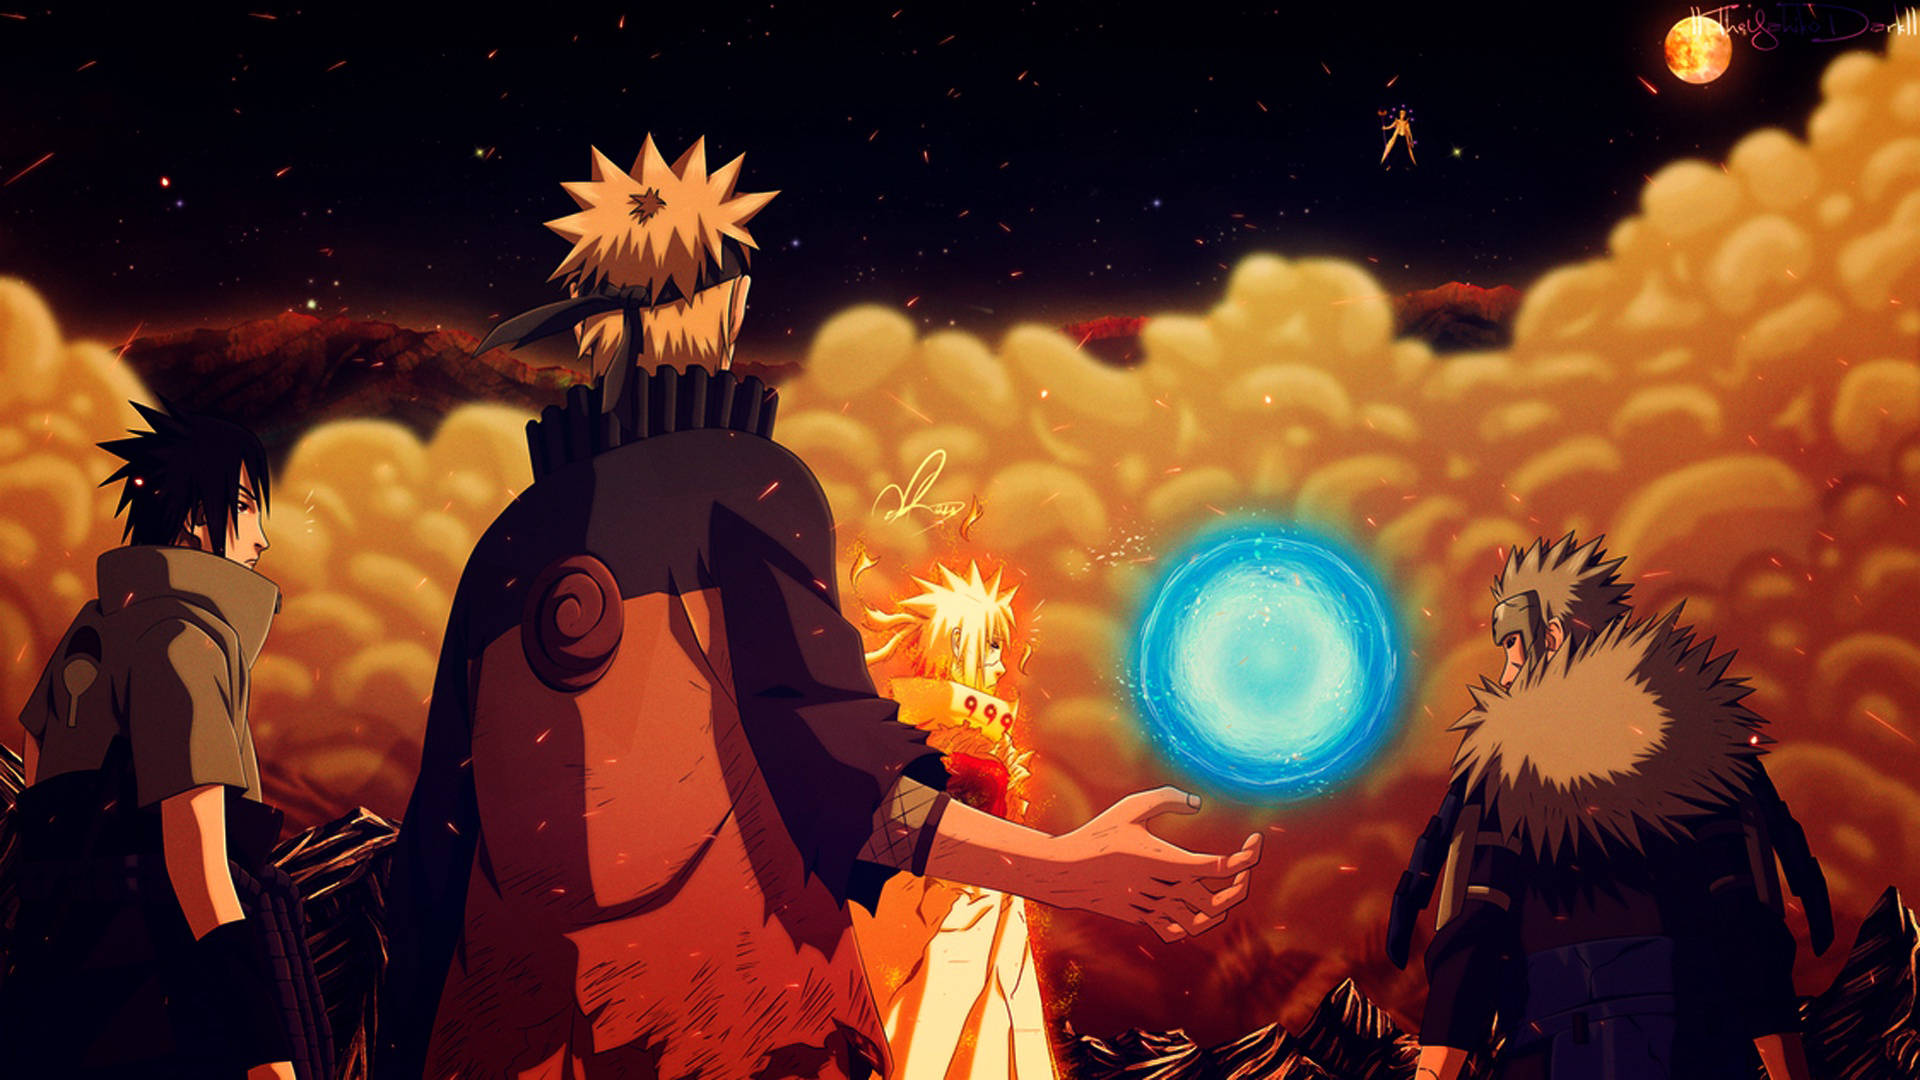 Coolest Naruto With Glowing Light Background